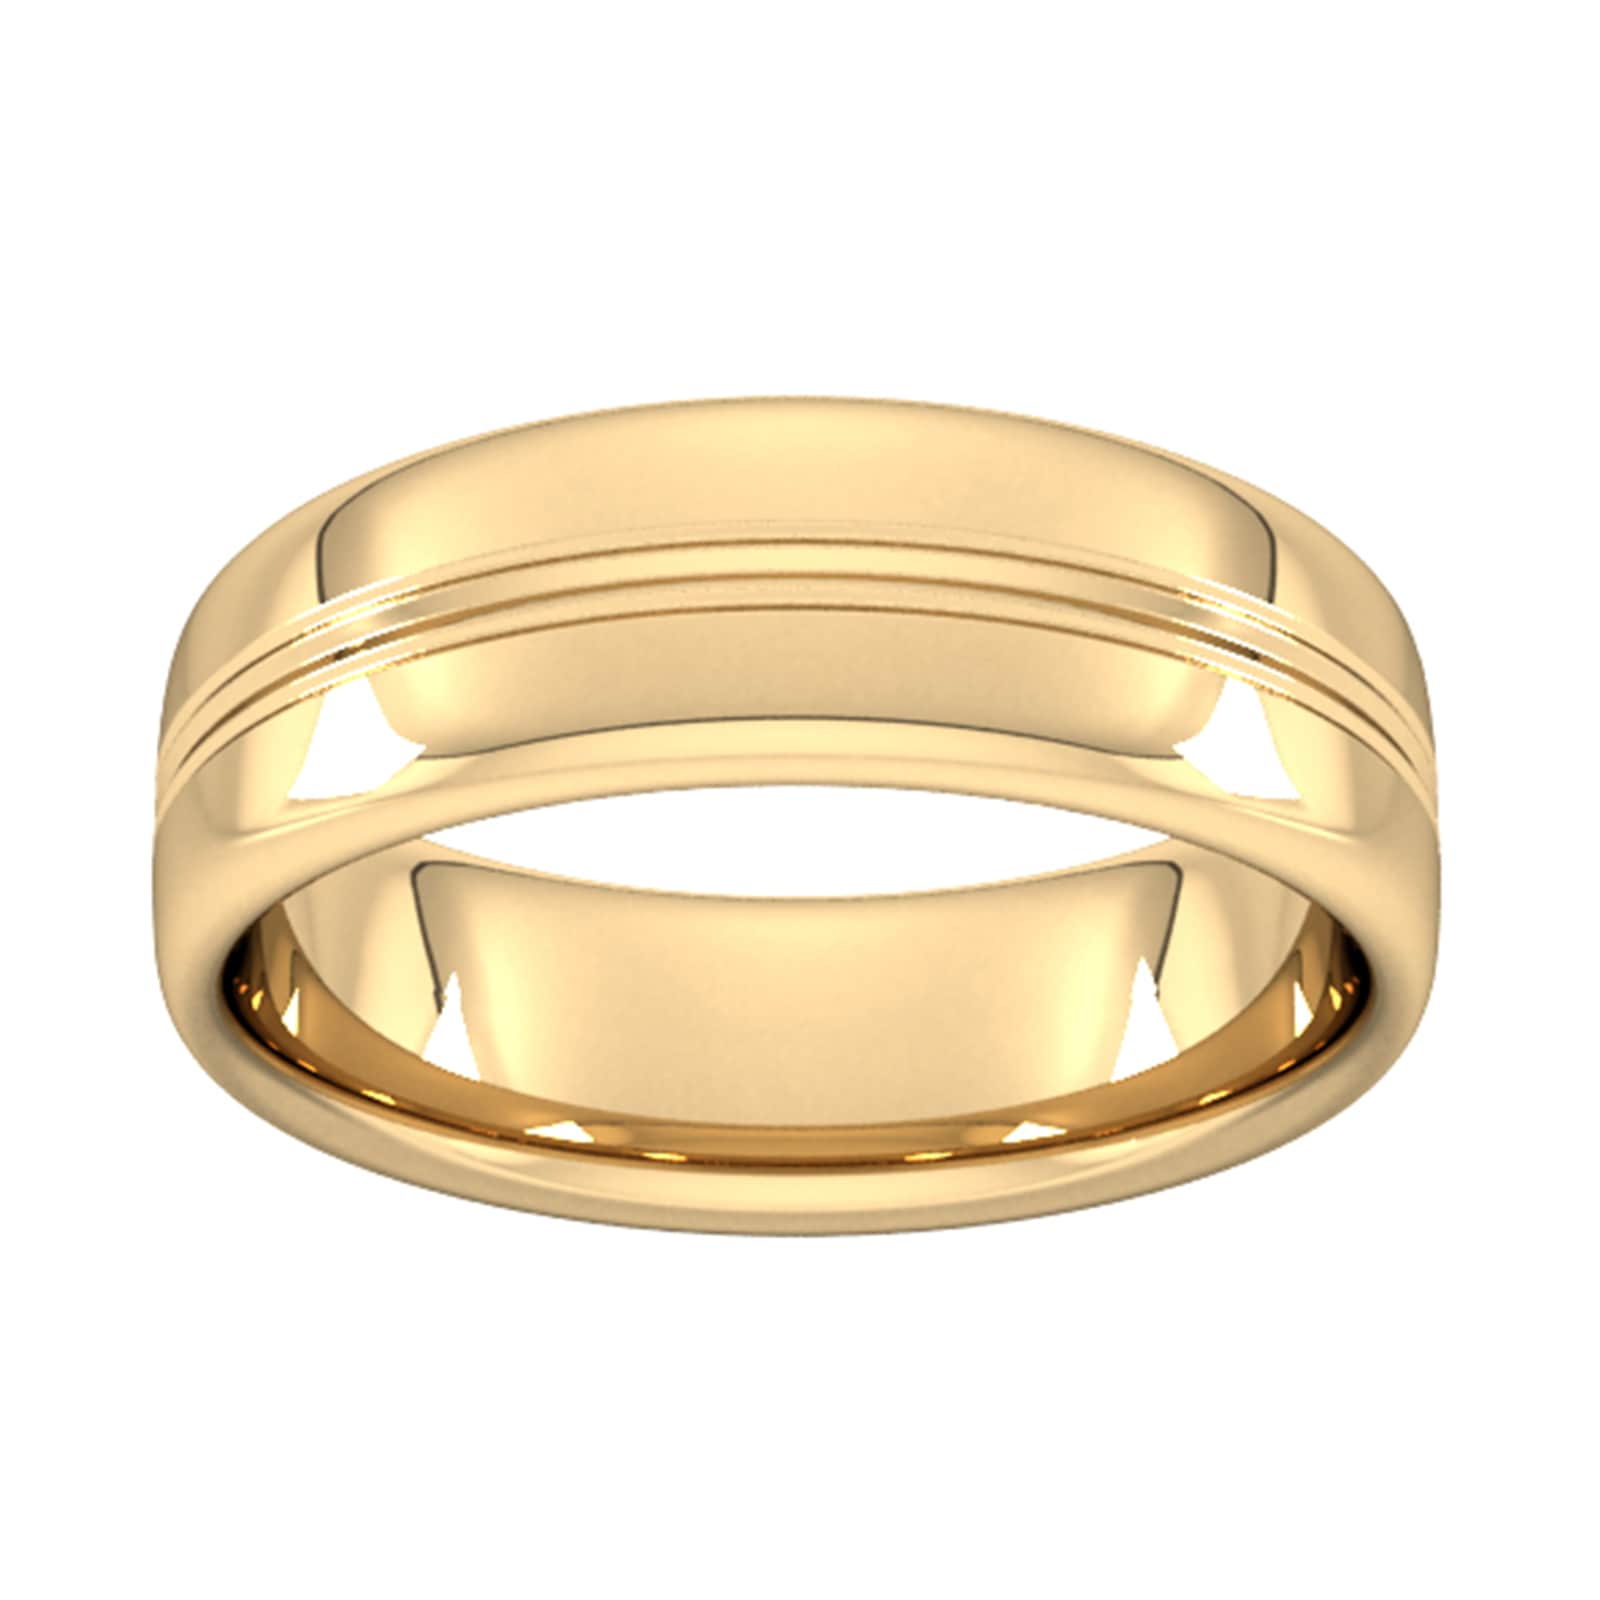 7mm Slight Court Heavy Grooved Polished Finish Wedding Ring In 9 Carat Yellow Gold - Ring Size H